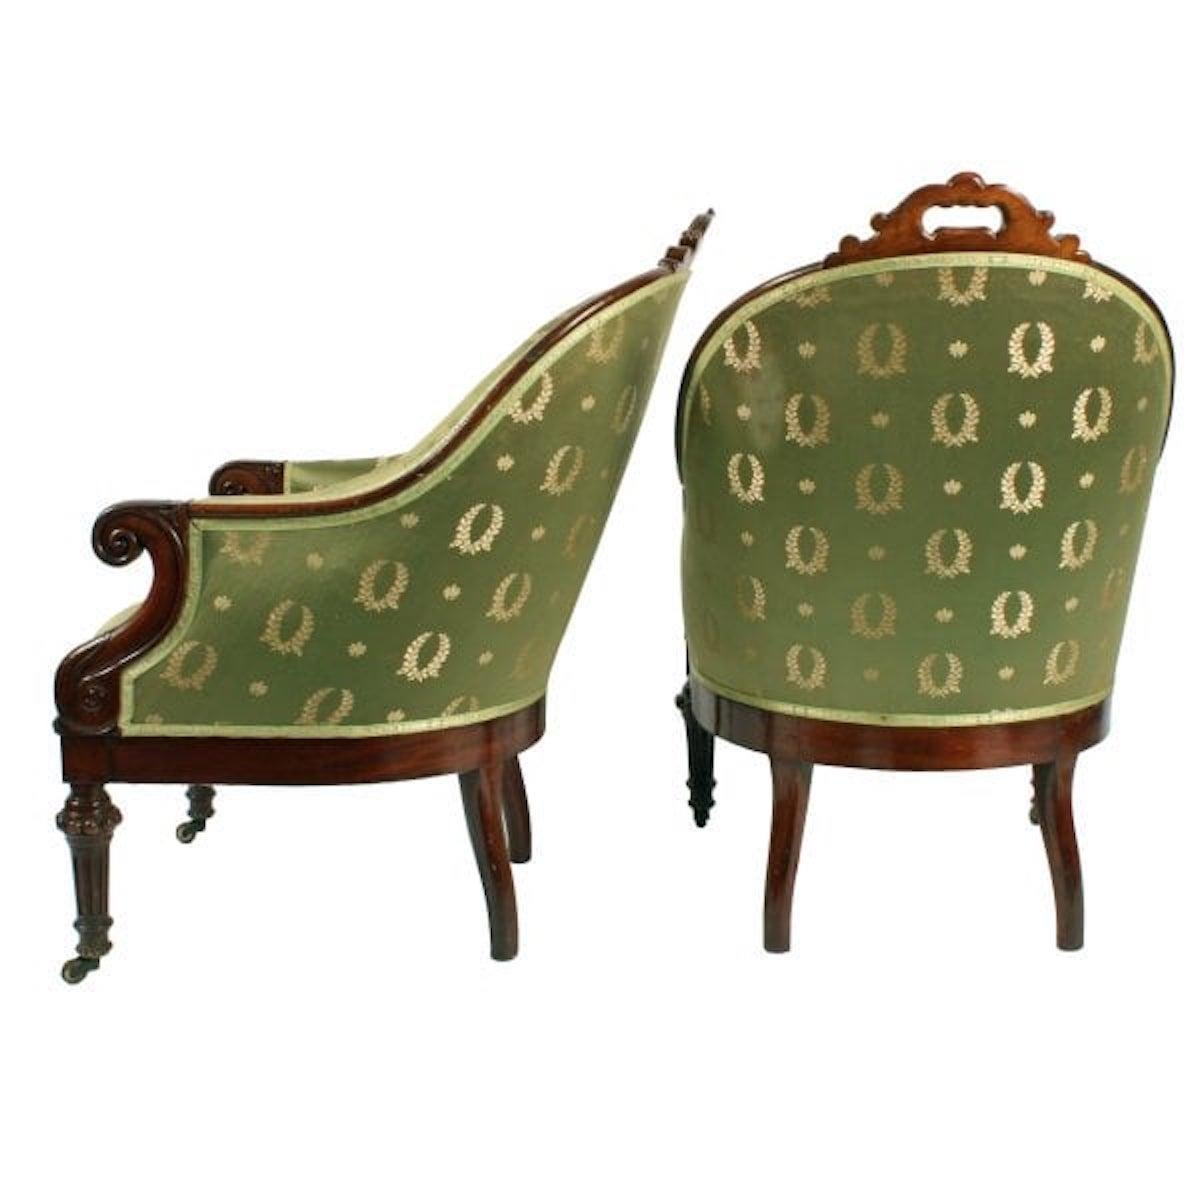 English Pair of George IV Library Arm Chairs, Early 19th Century For Sale